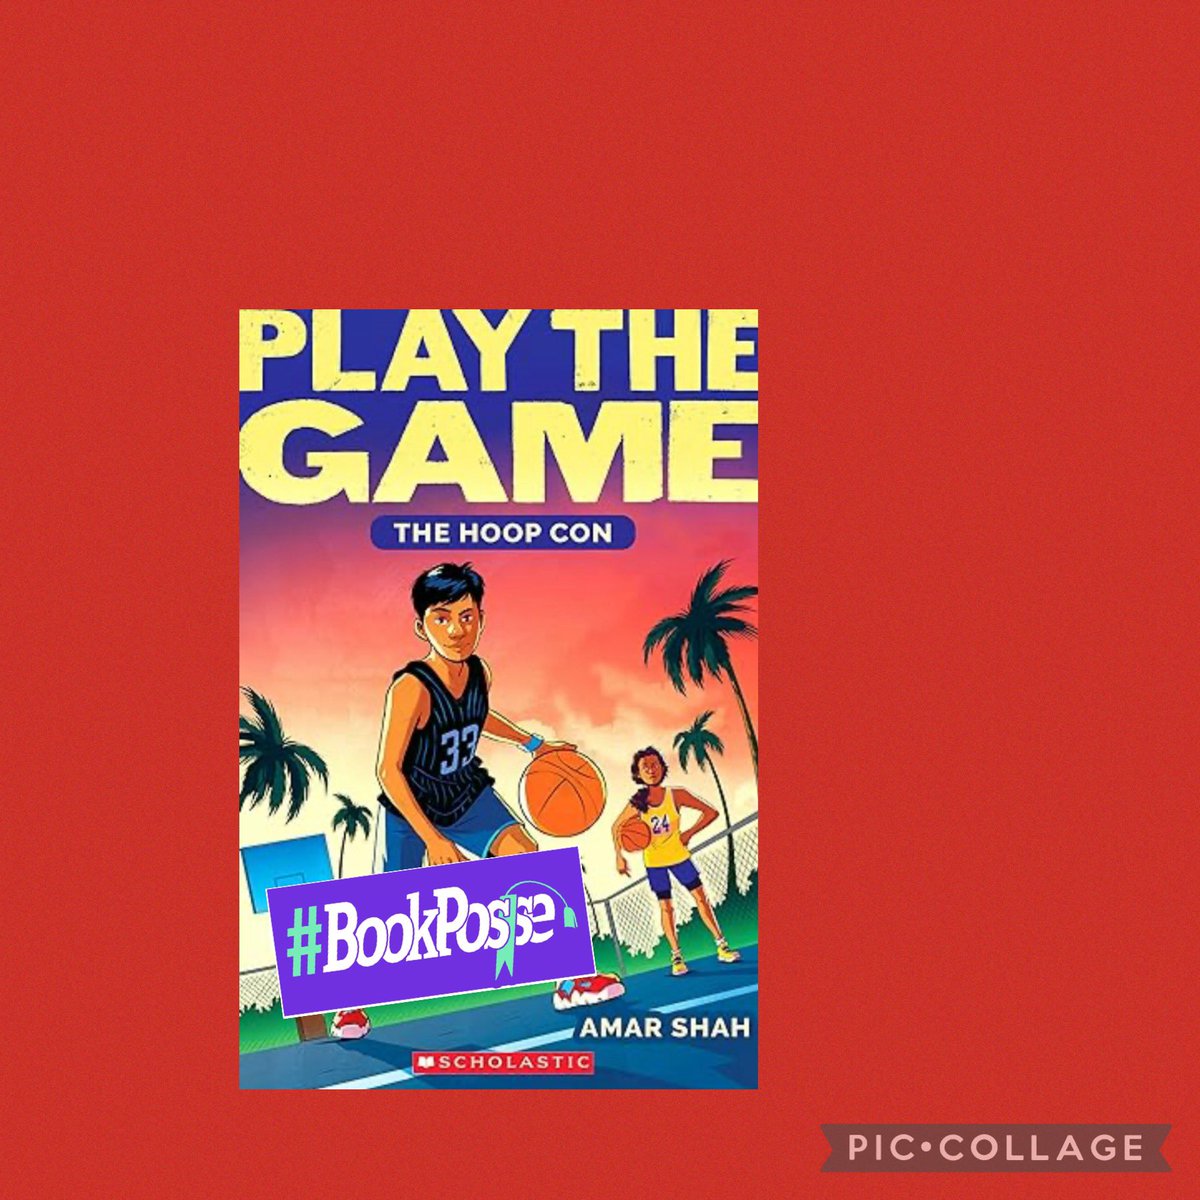 My newest read looks like it’s more than just basketball. Raam has skills on the court, but are those skills enough to overcome his newest viral fail? I know this is going to be a fun book to read, Thank you #bookposse @amarshah @Scholastic